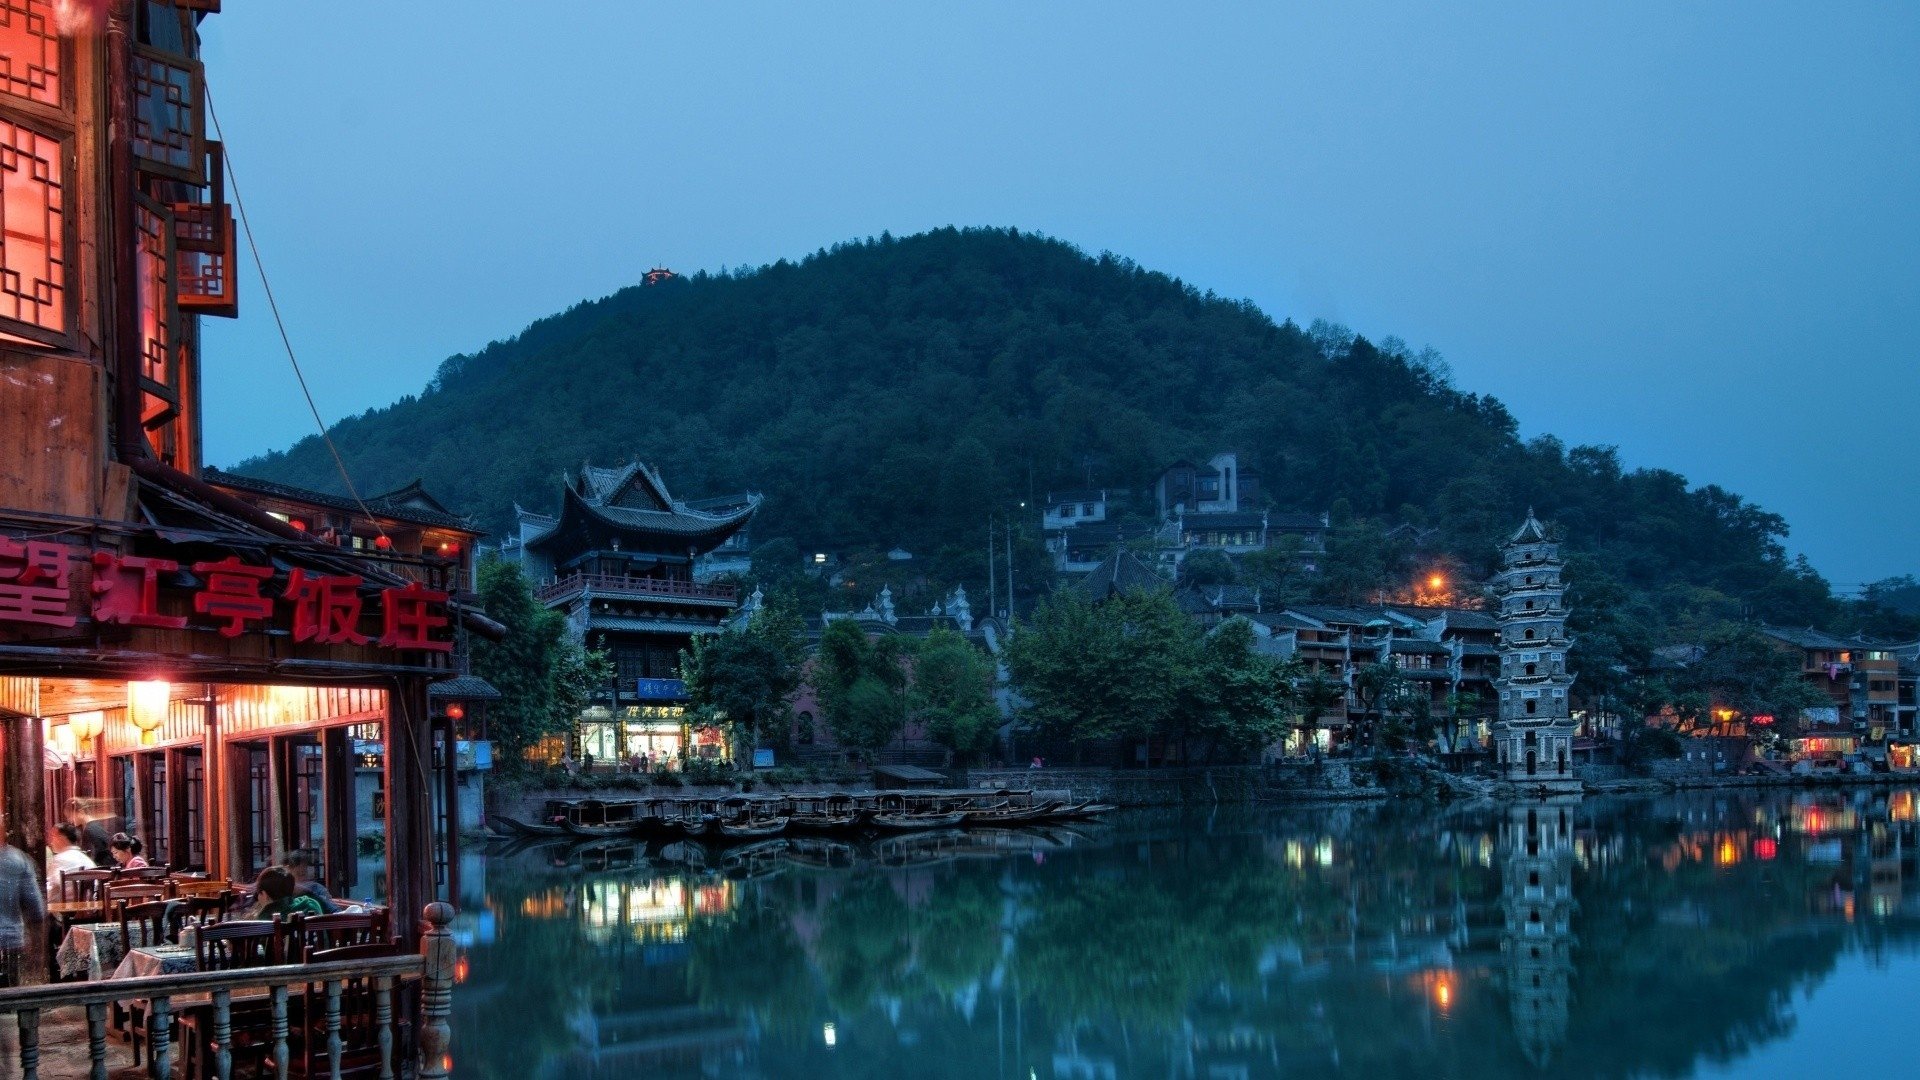 china, House, Buildings, Hills, Trees, Lake, Water, Night, Sunset